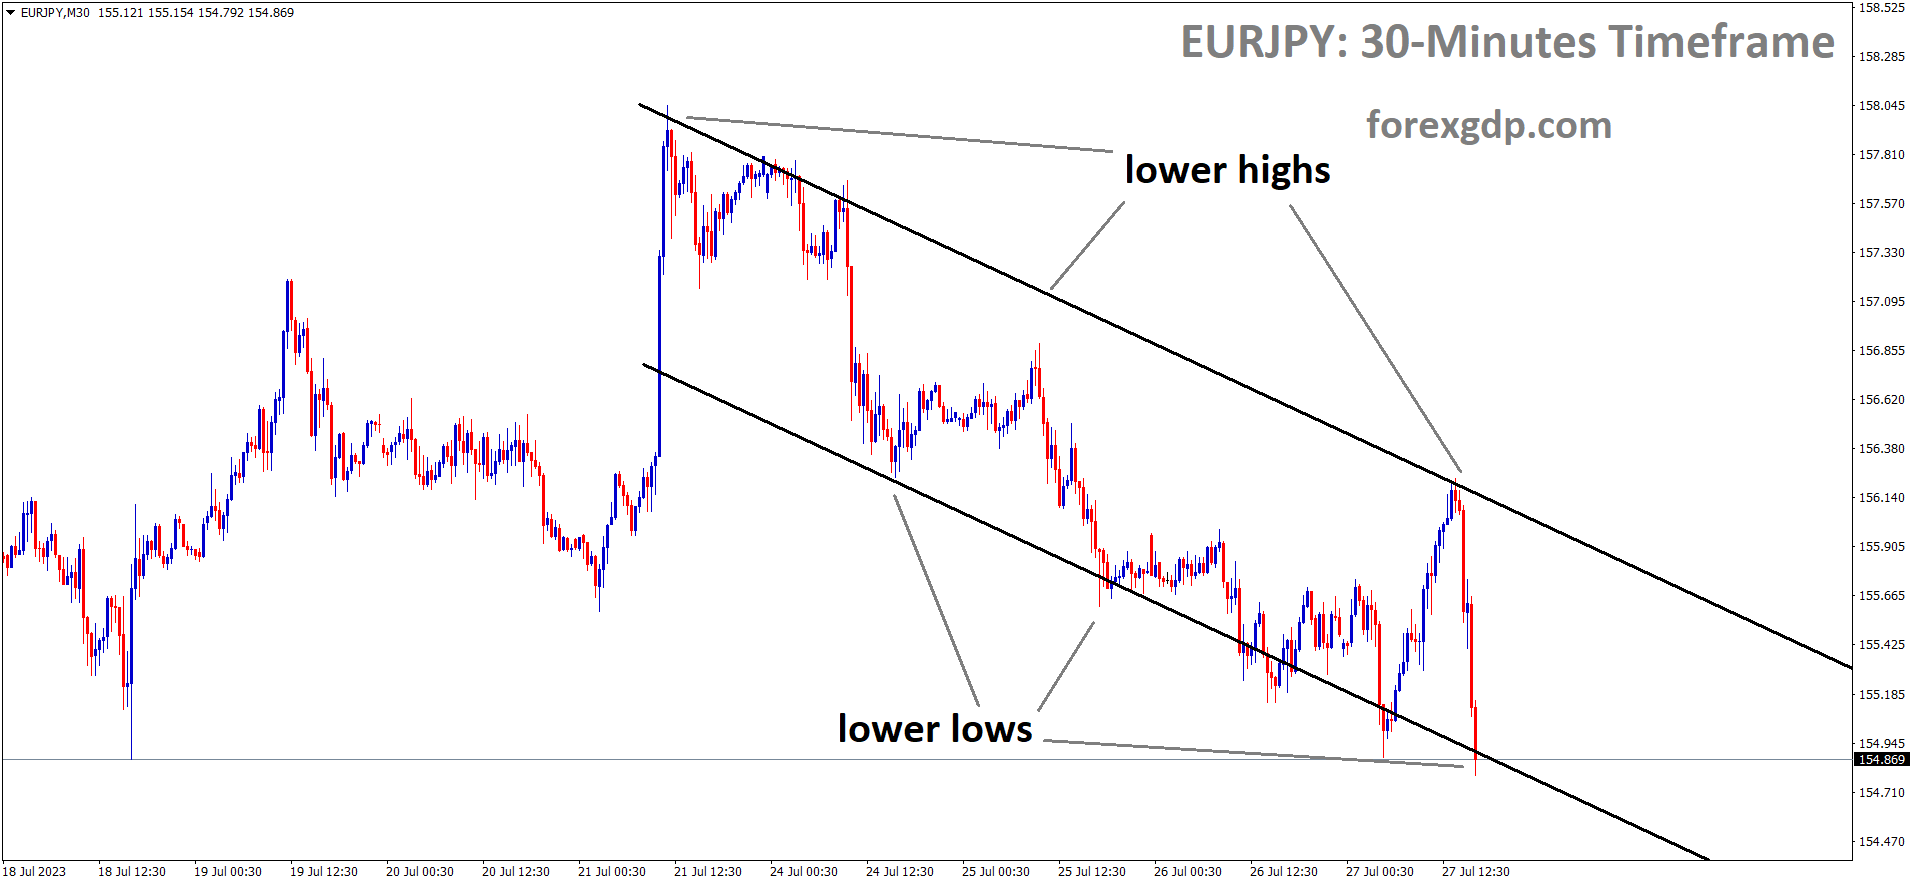 EURJPY M30 TF analysis Market is moving in the Descending channel and the market has reached the lower low area of the channel